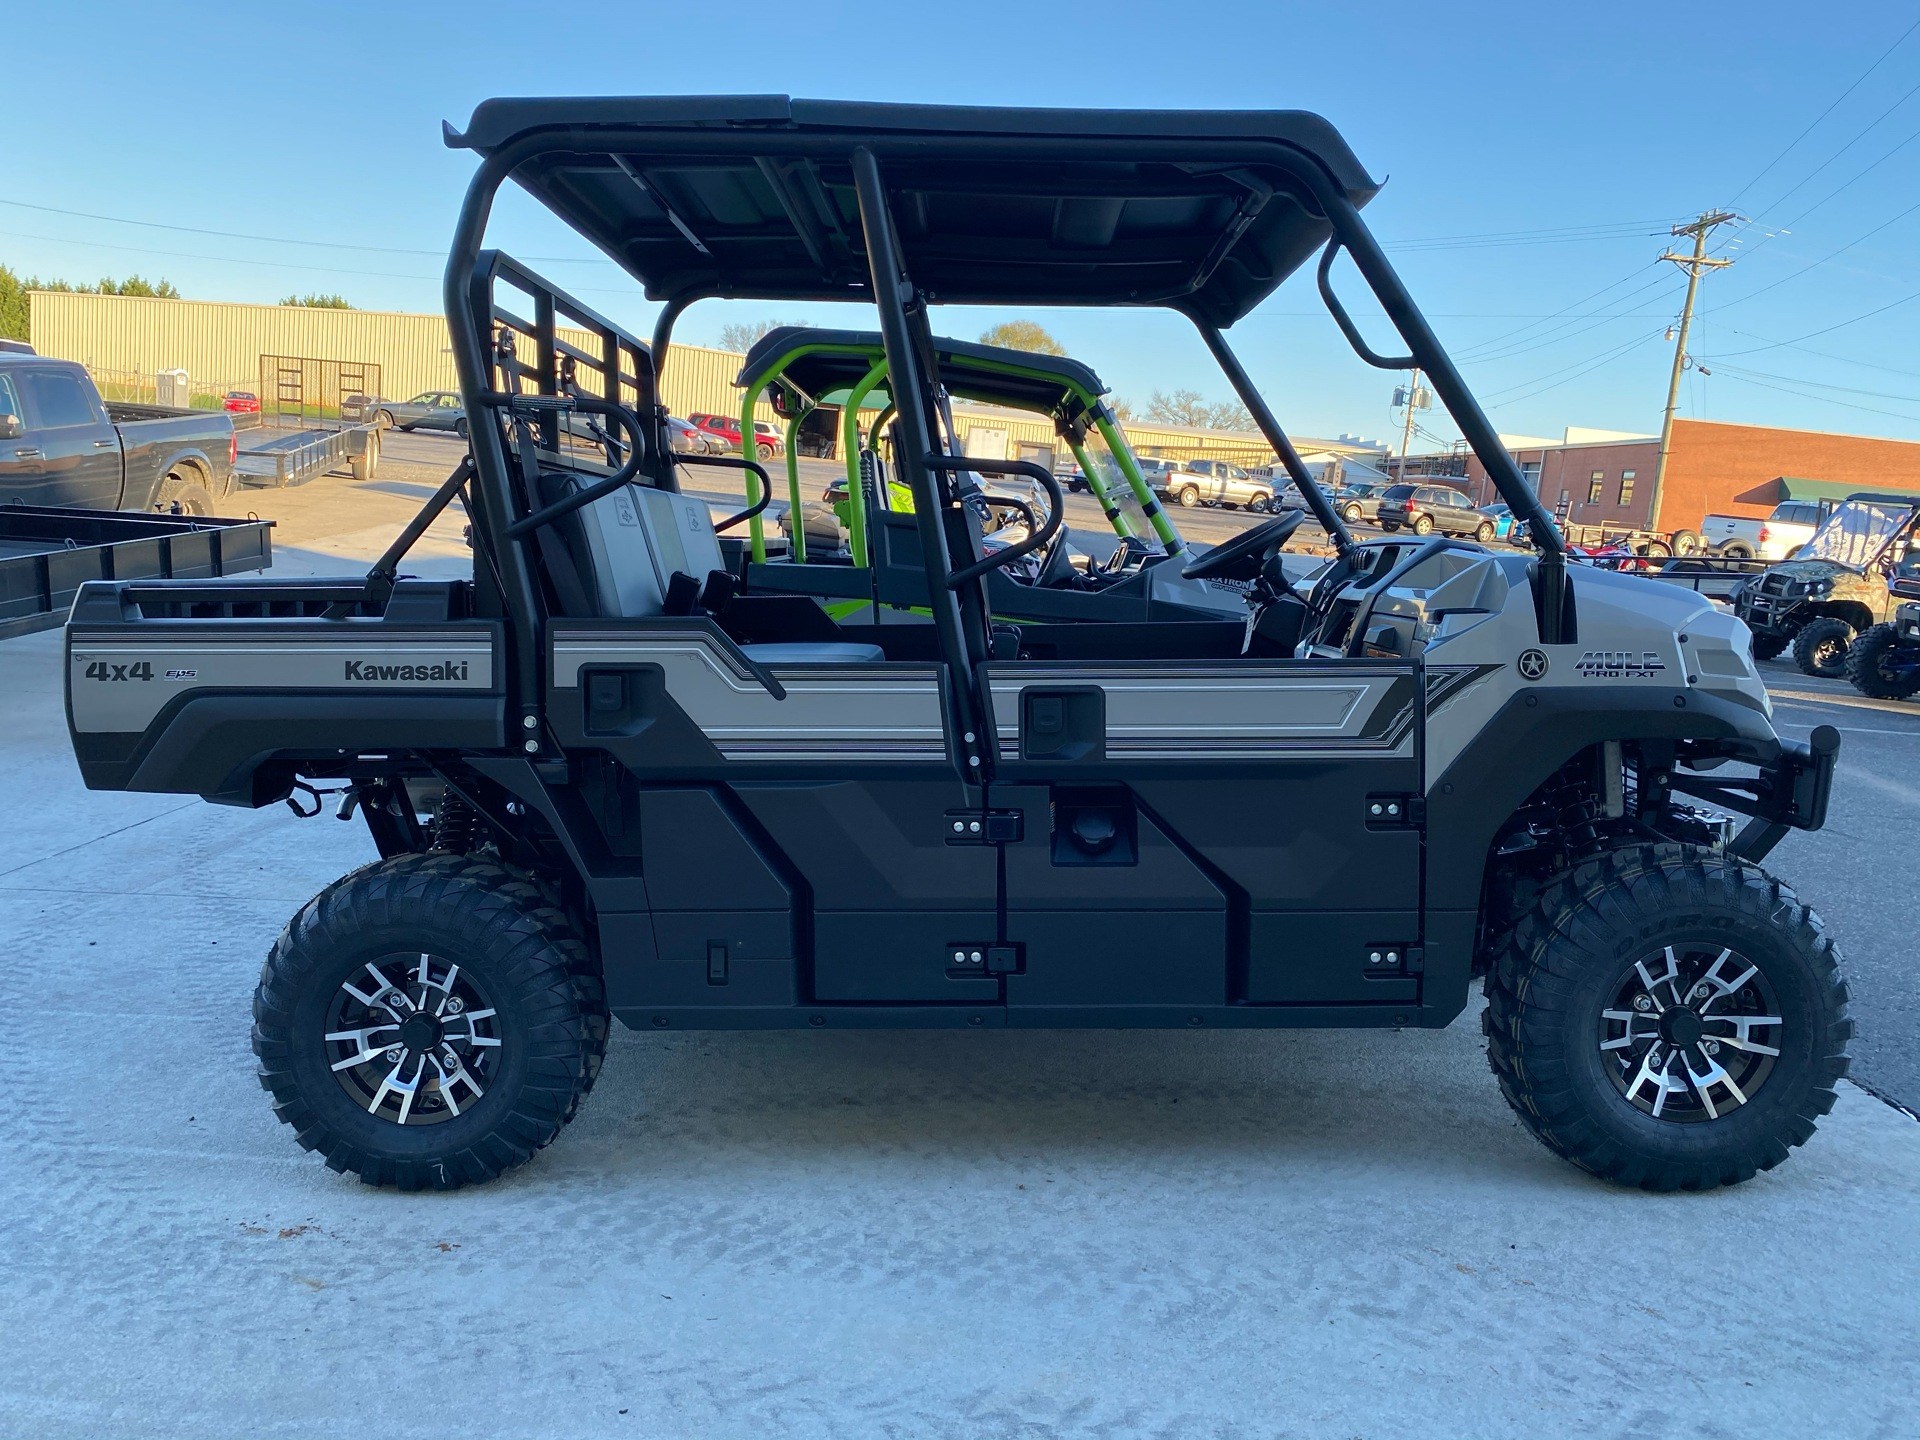 New 2021 Kawasaki Mule PRO-FXT Ranch Utility in Statesville, NC | Stock - greatwesternmotorcycles.com